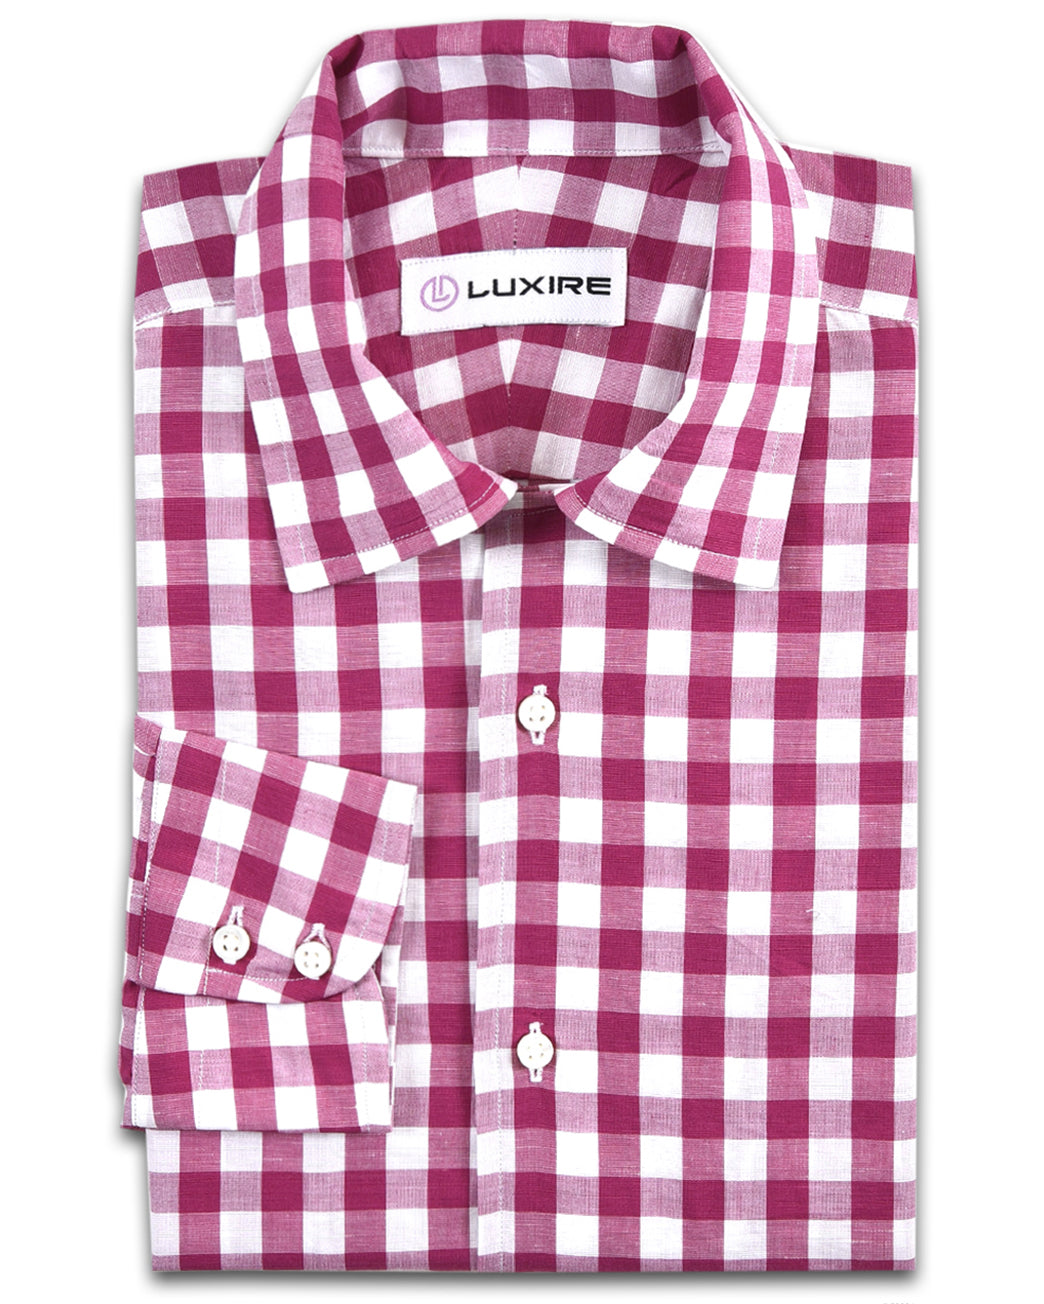 Front view of custom linen shirt for men by Luxire in pink and white gingham